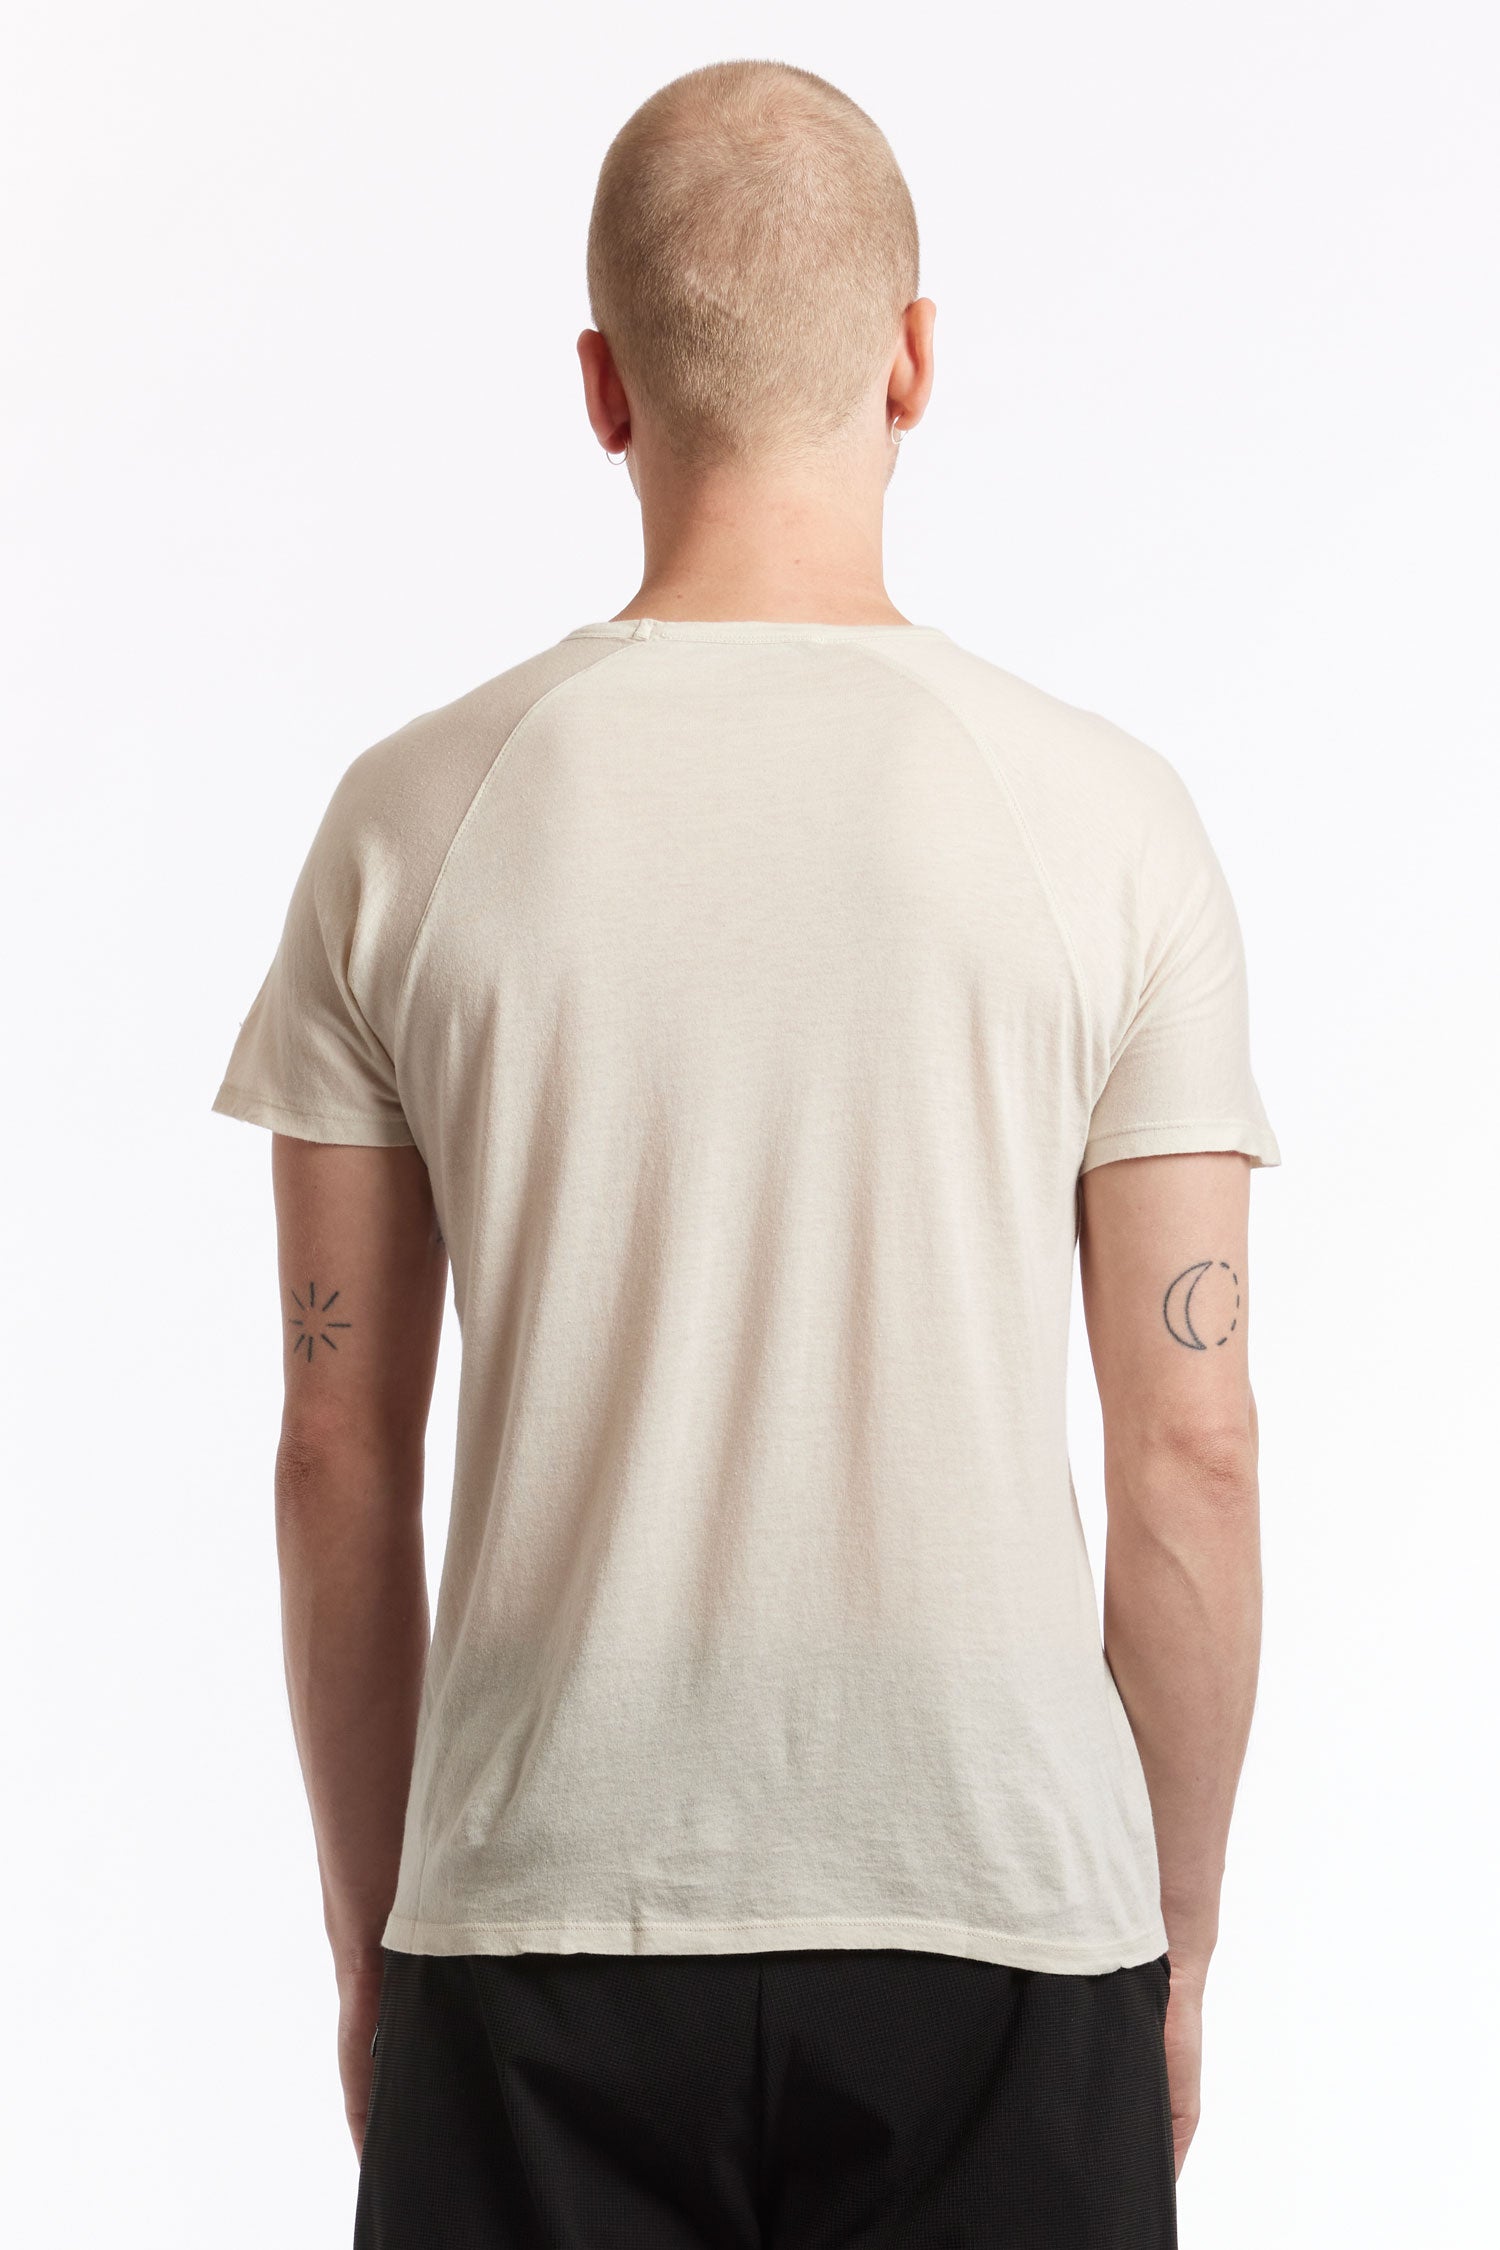 The AFFXWRKS - SHOULDERLESS TEE  available online with global shipping, and in PAM Stores Melbourne and Sydney.